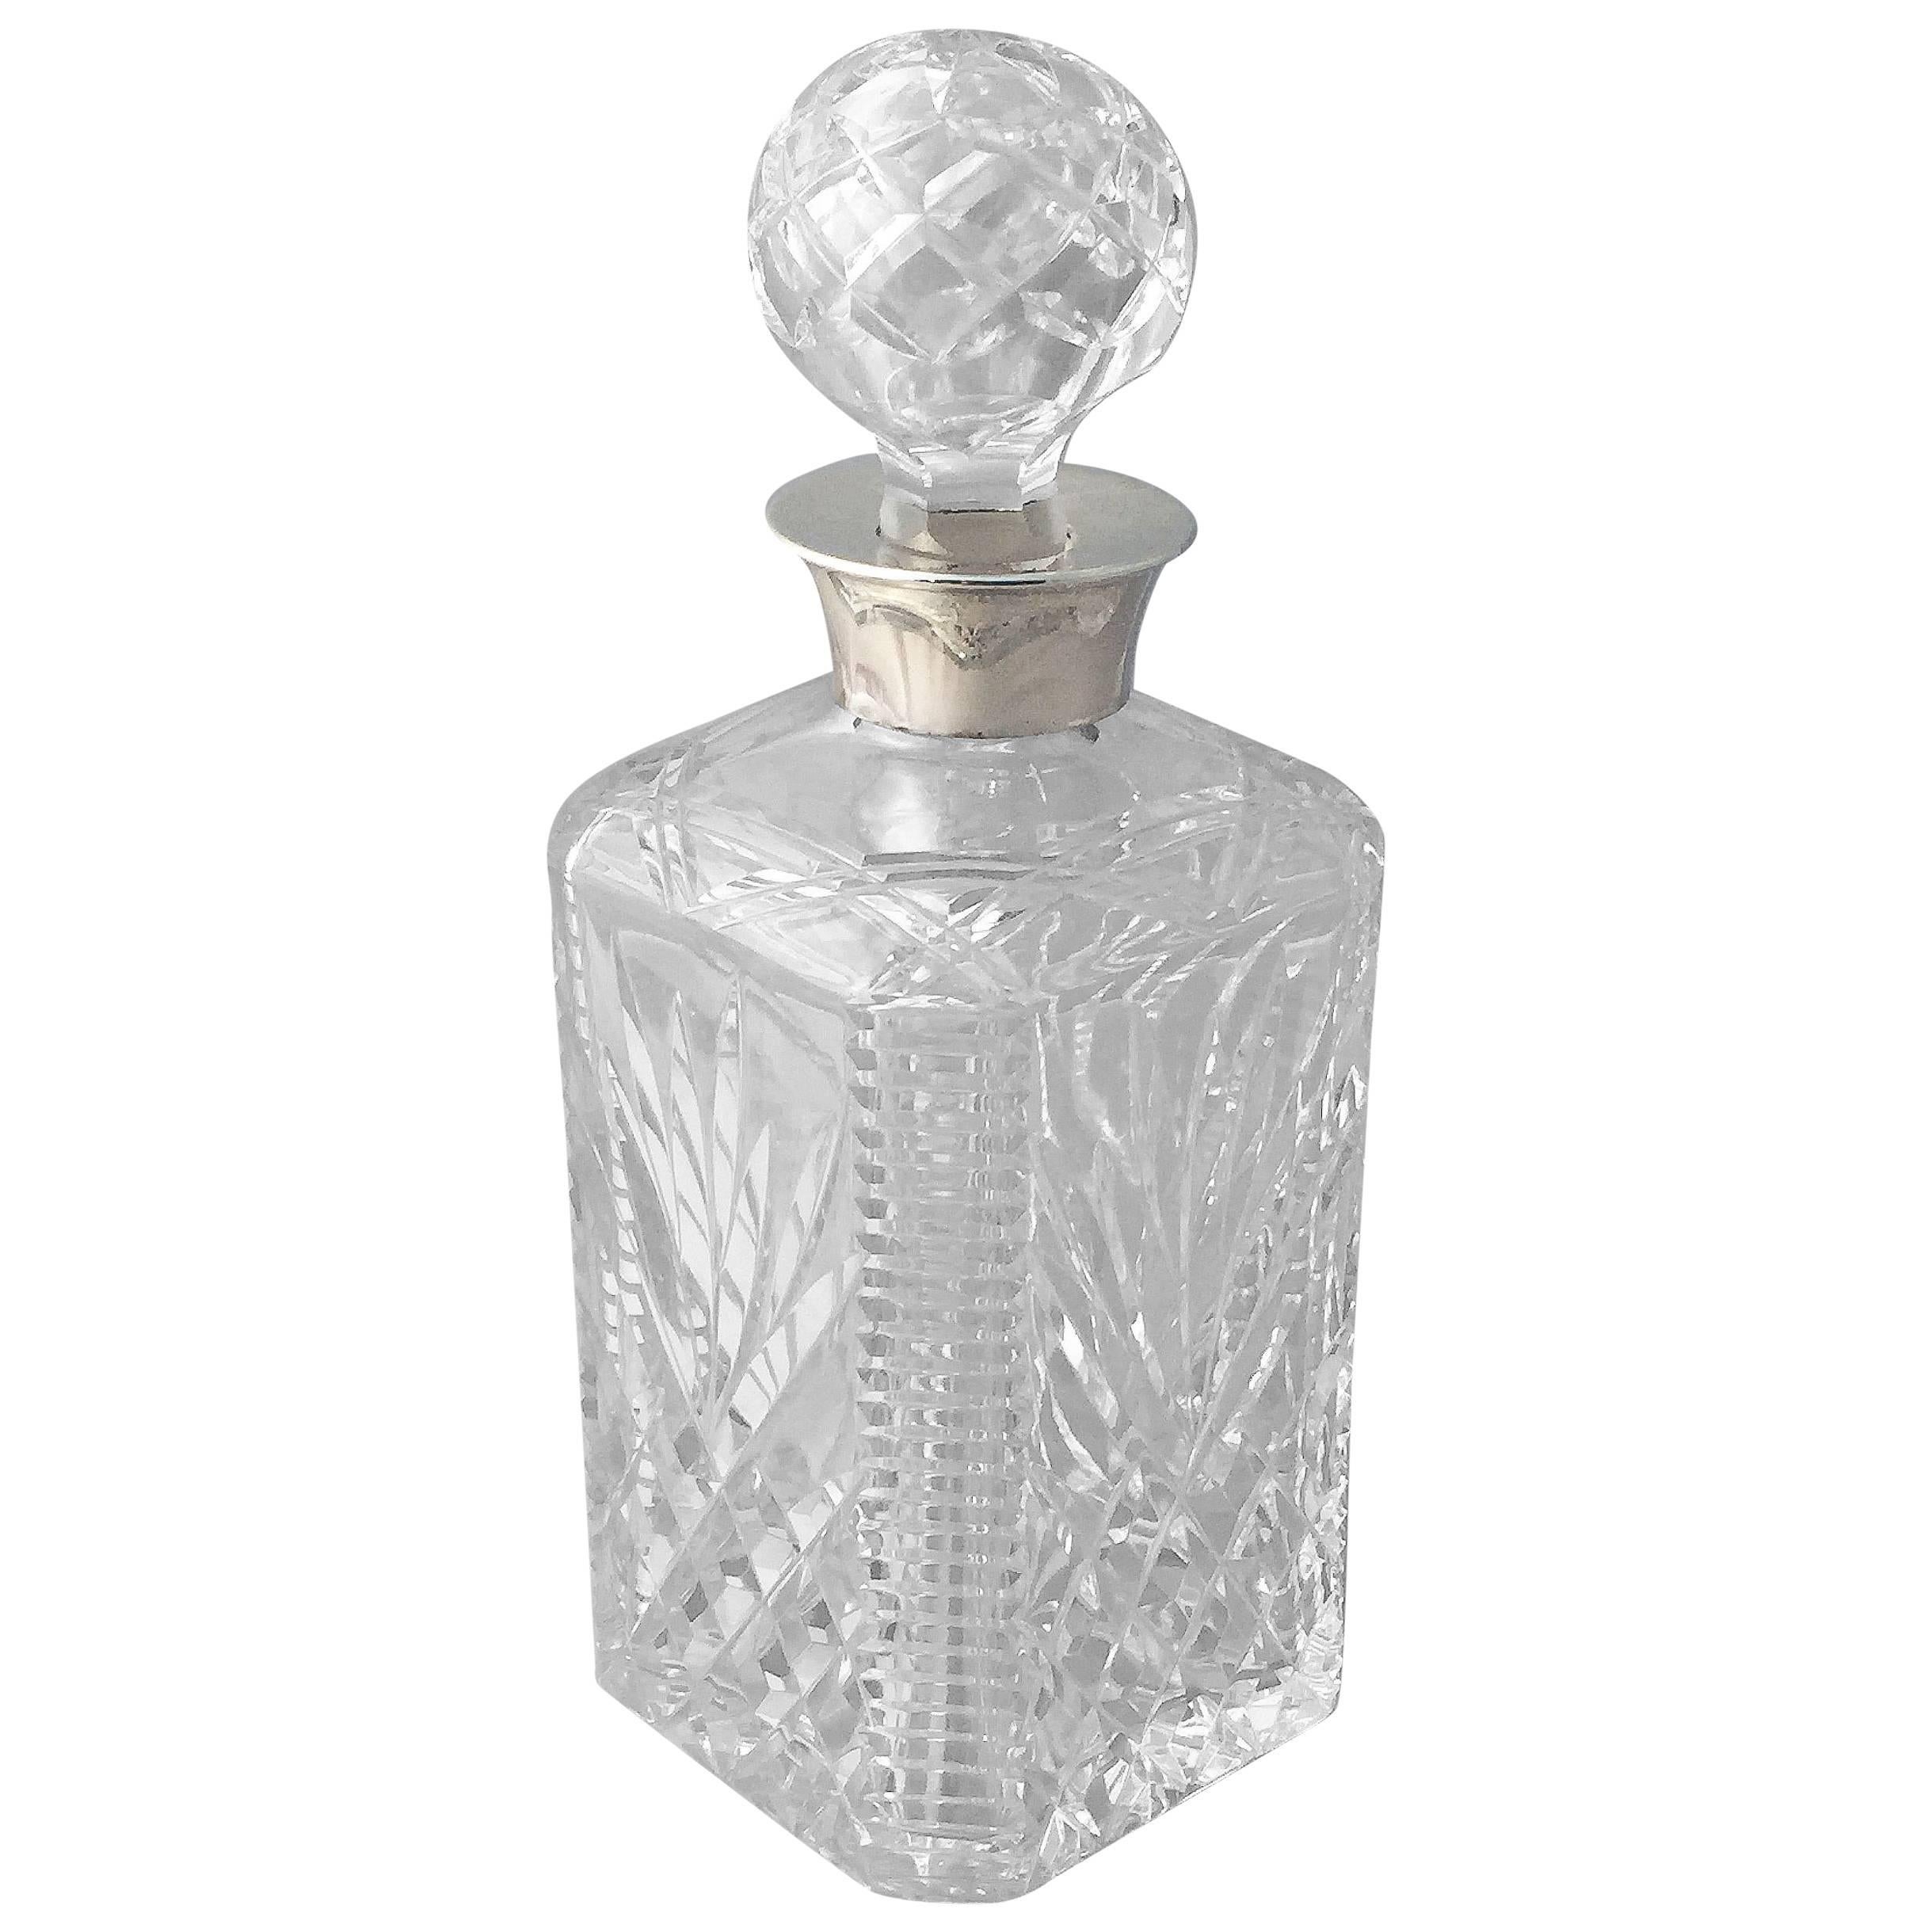 English Cut Crystal Spirits or Whiskey Decanter with Sterling Silver Collar